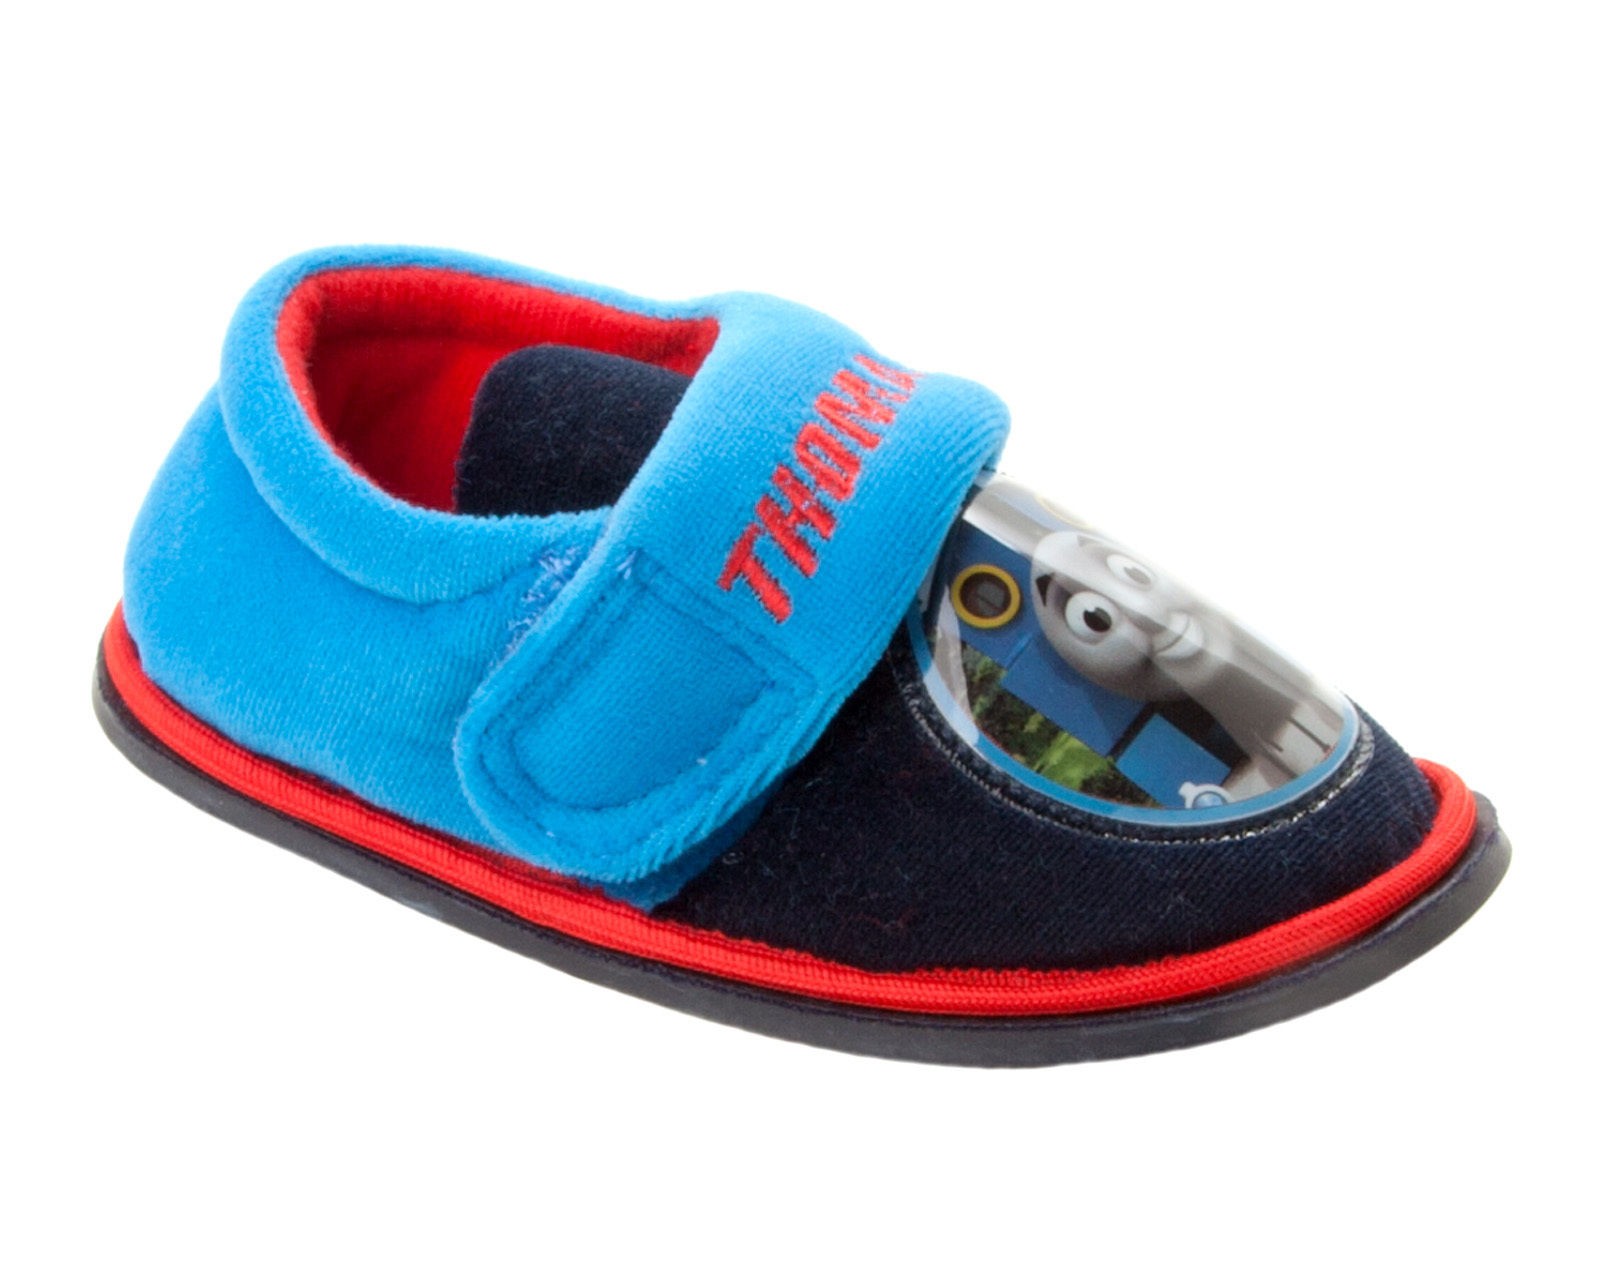 thomas the tank engine slippers for toddlers